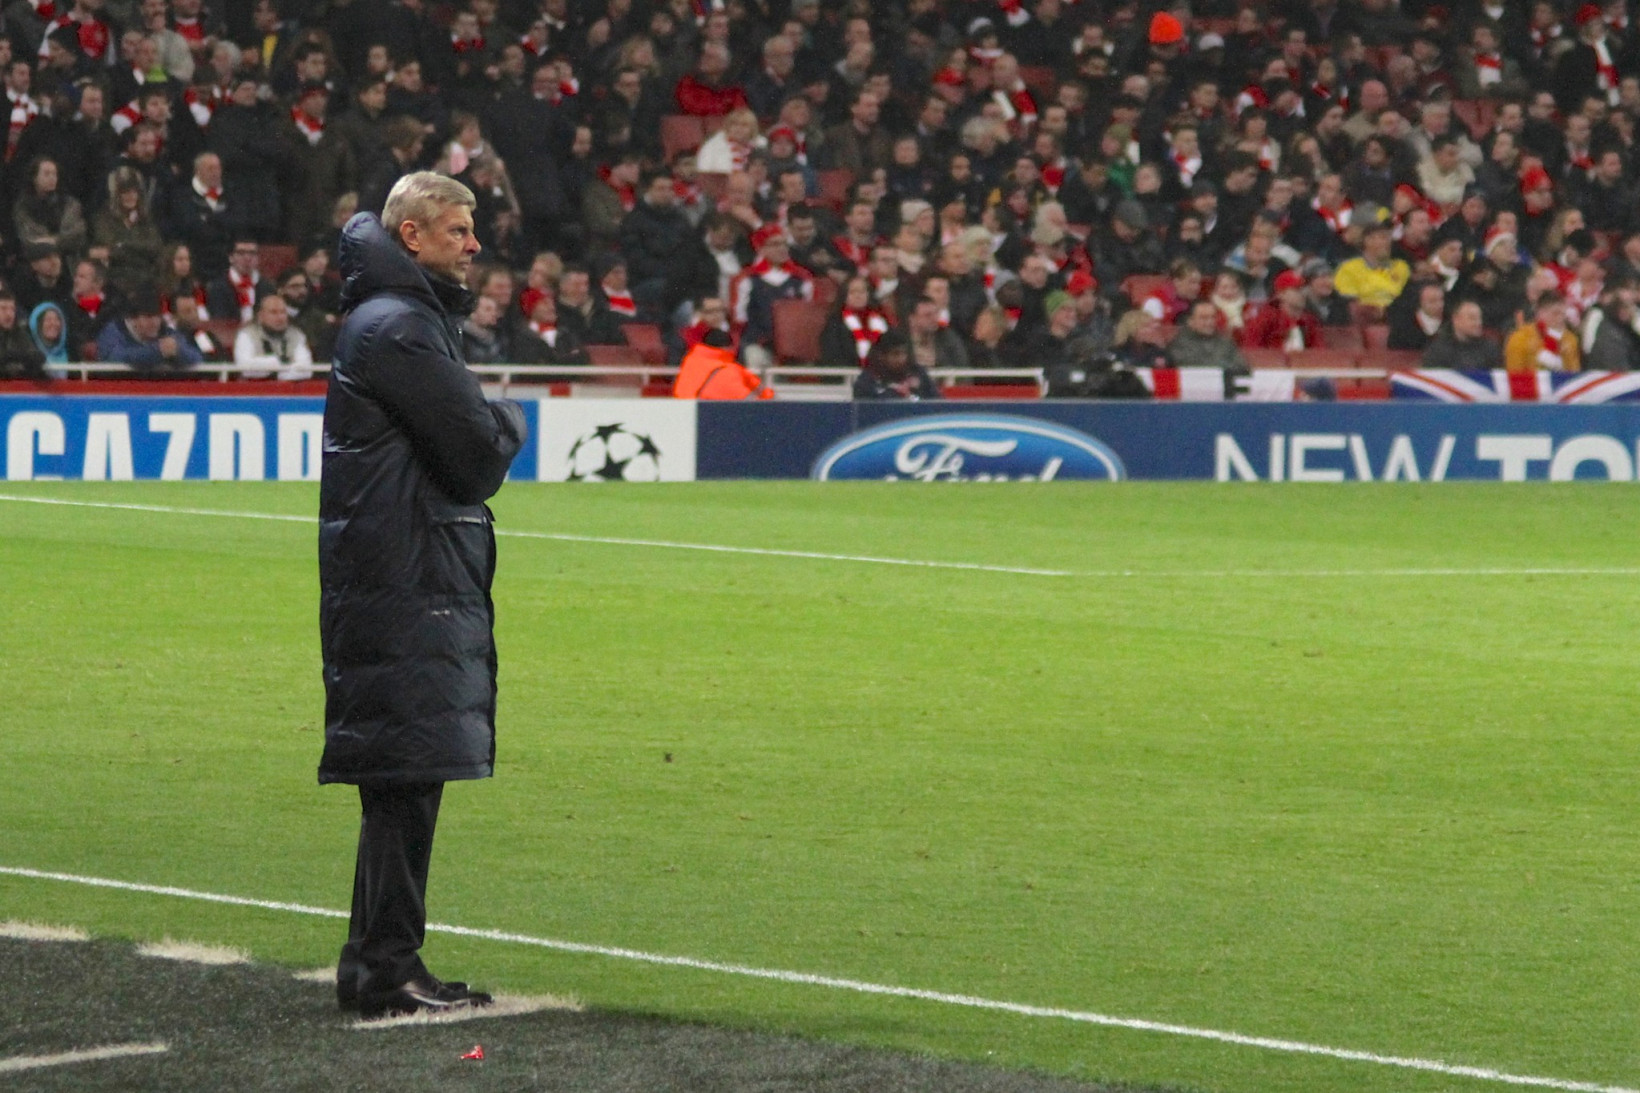 Arsene Wenger on the touchline of a football pitch